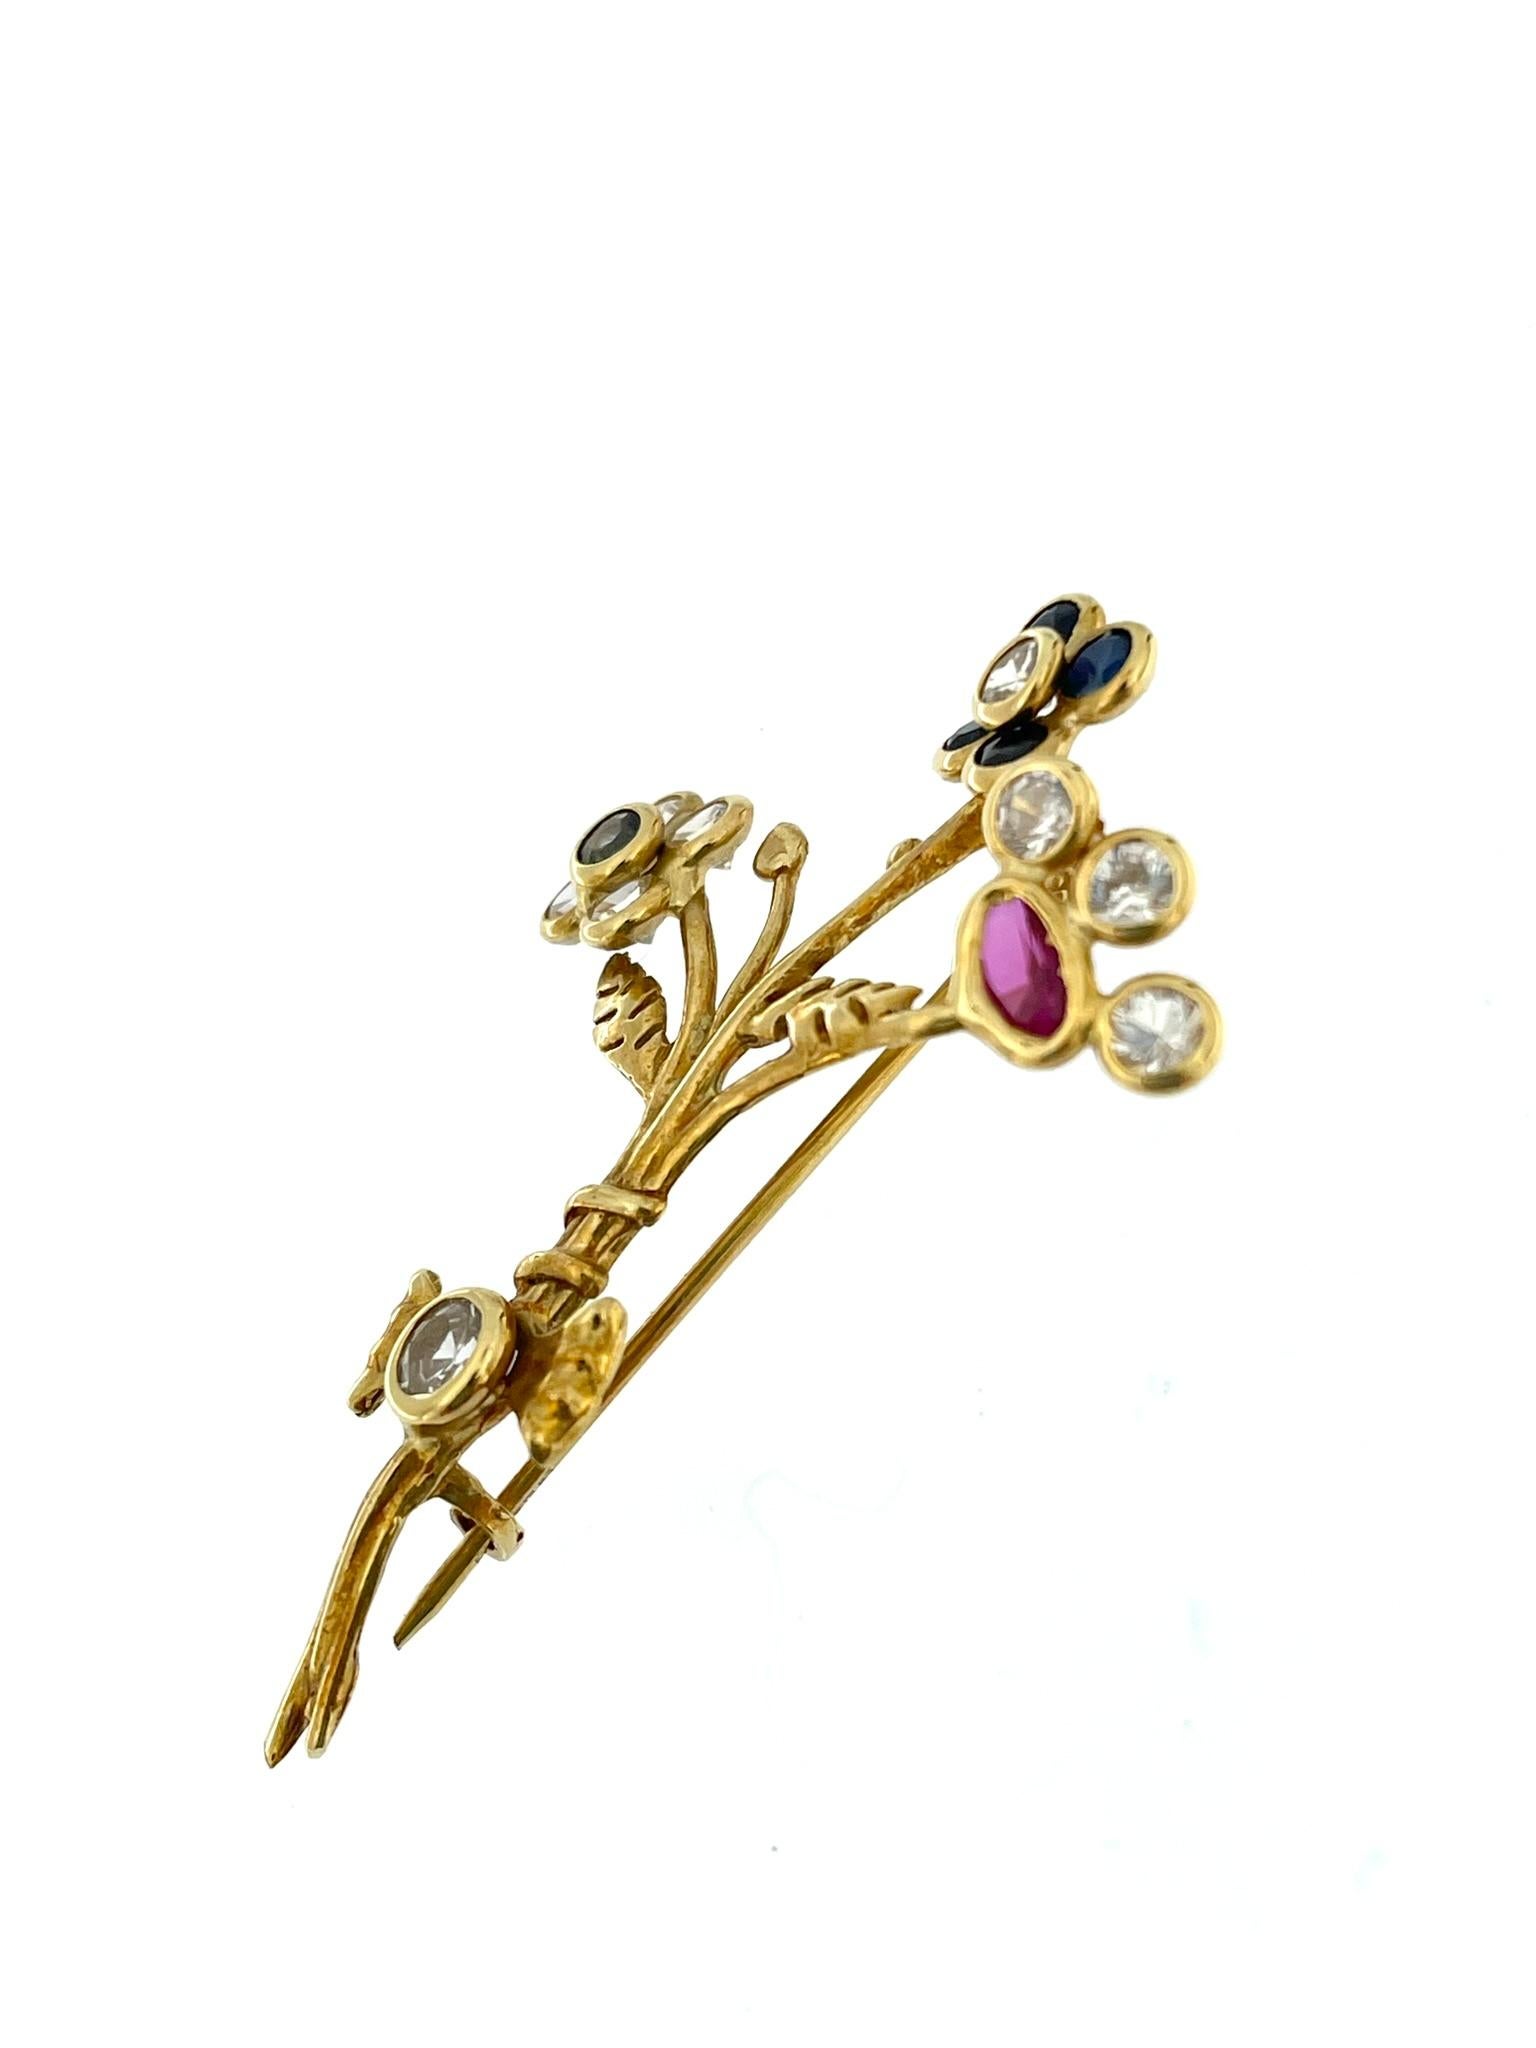 Handcrafted 18 karat Yellow Gold Brooch with Zircons and Quartz In Good Condition For Sale In Esch-Sur-Alzette, LU